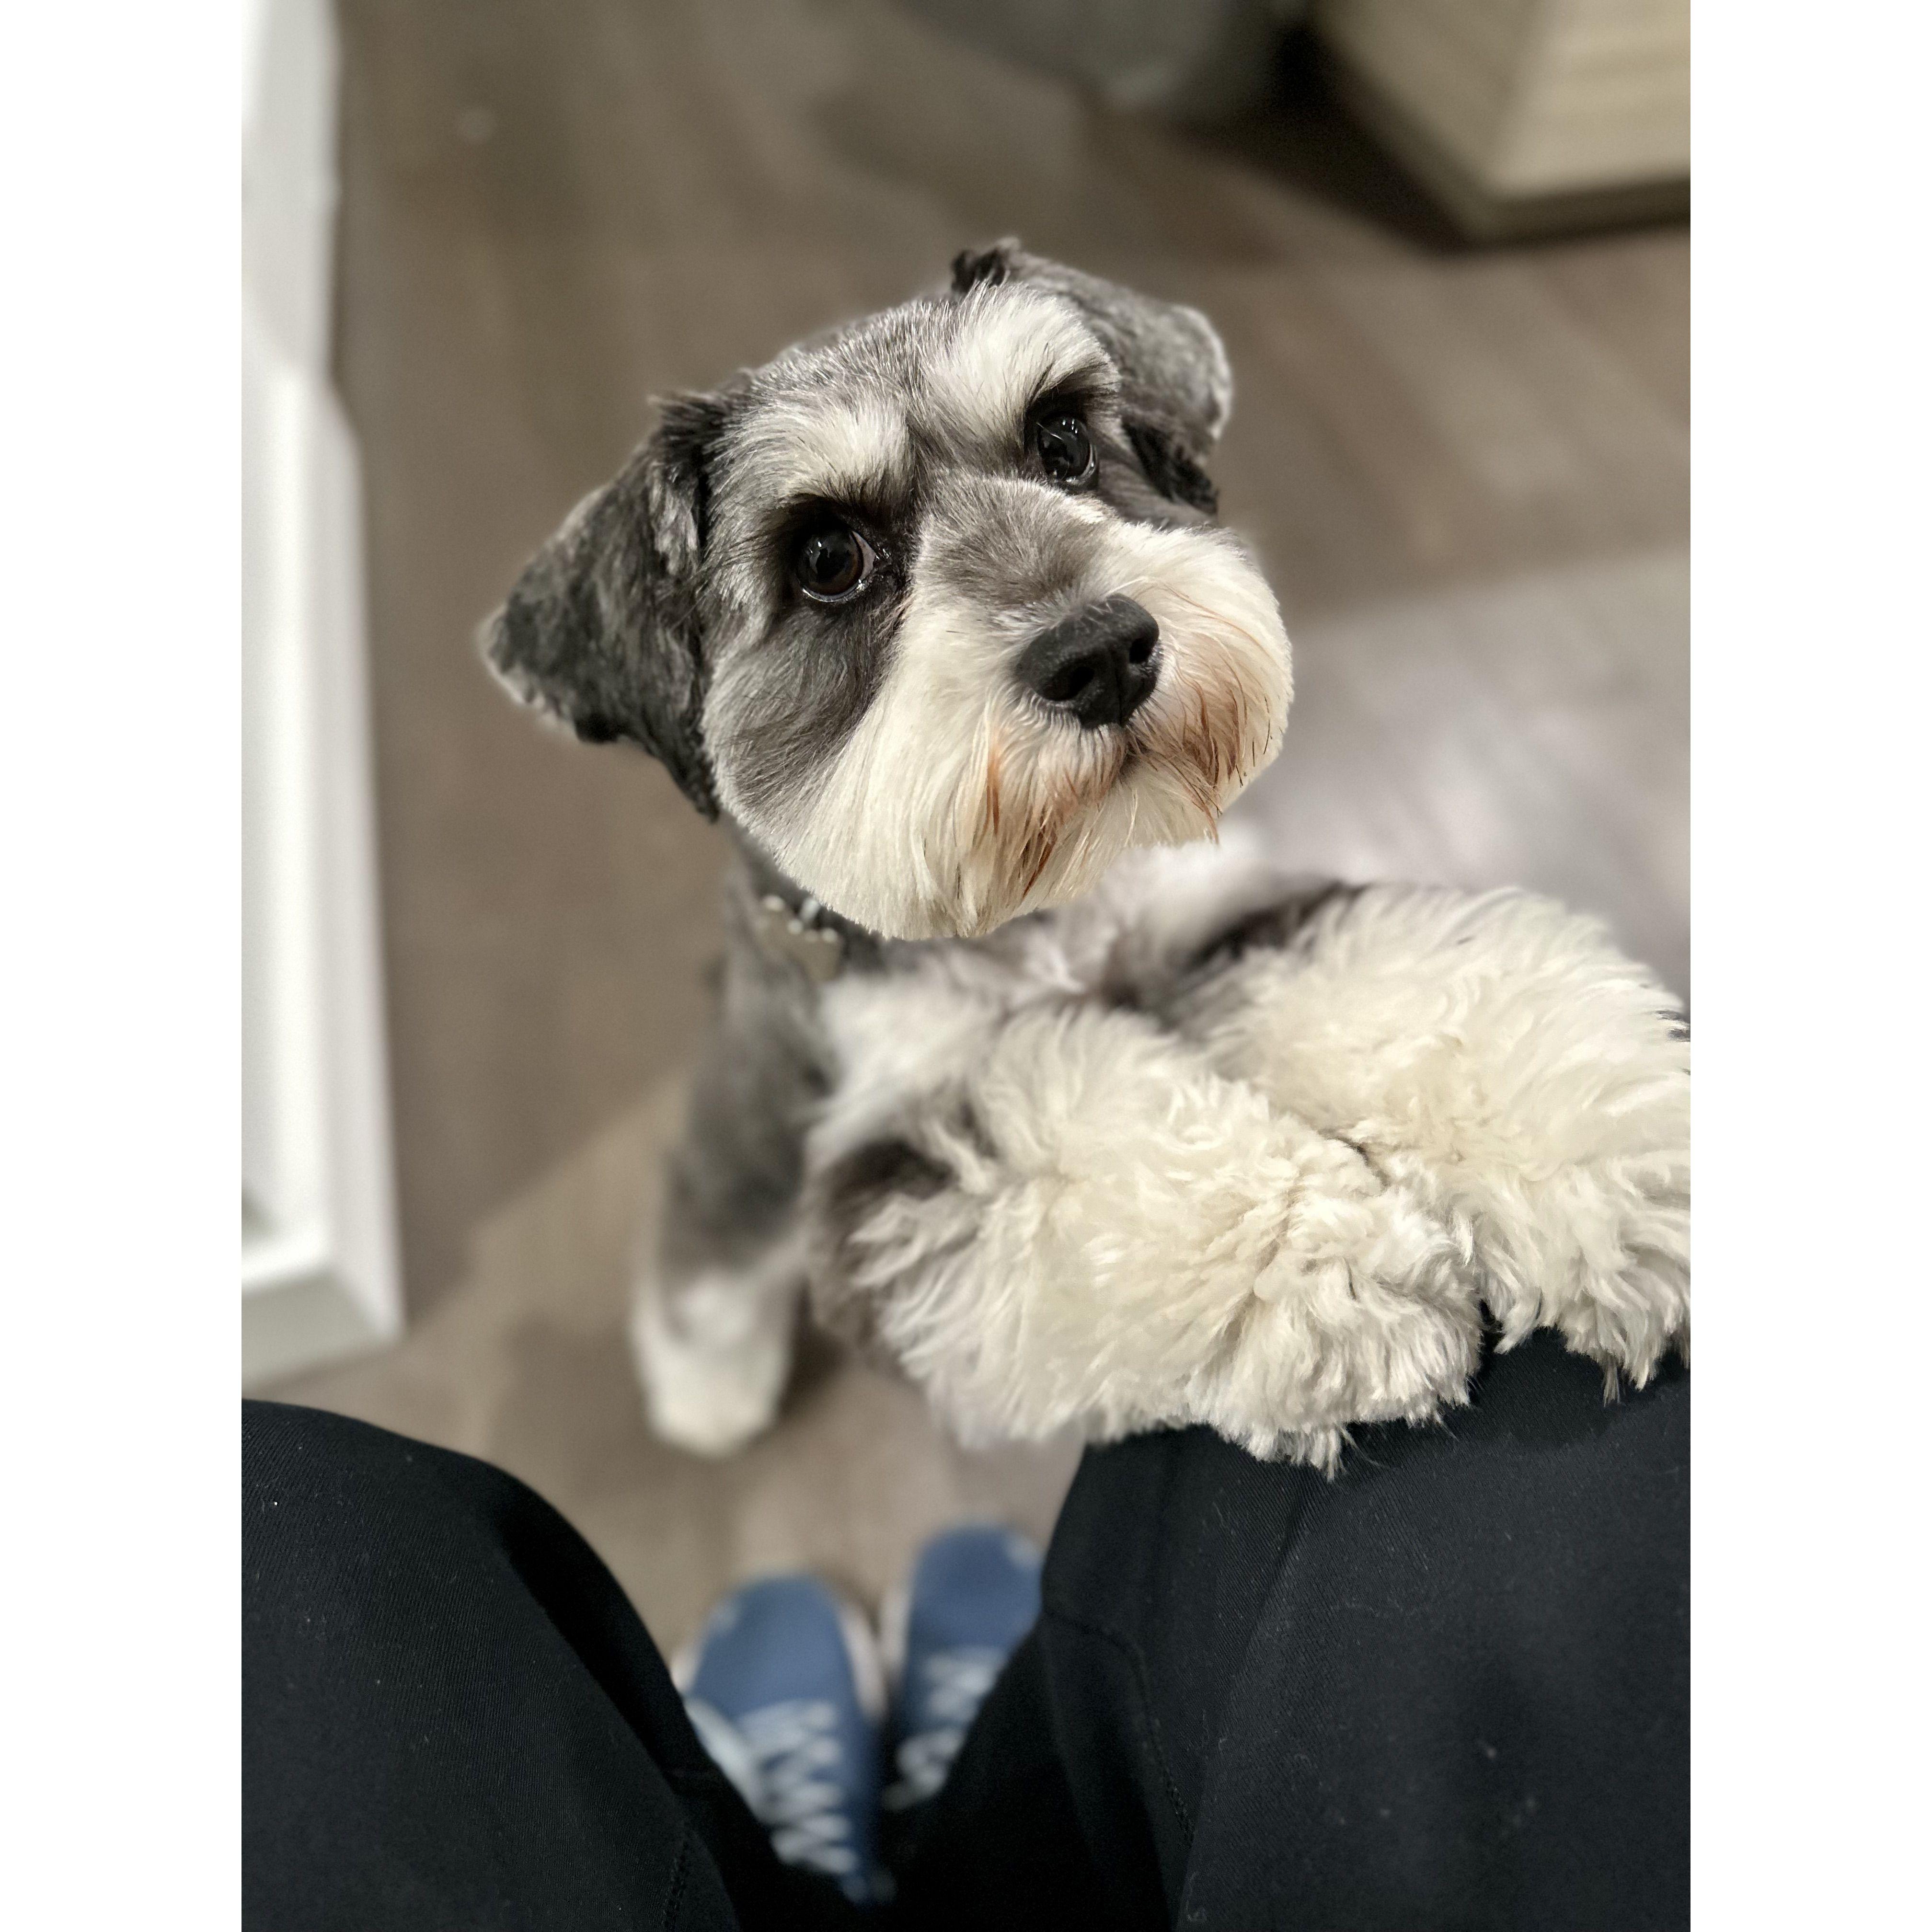 Got a treat for me? (2021): Mila the Miniature Schnauzer loves humans more than other canines, and is "treat-motivated" according to her puppy trainer :D